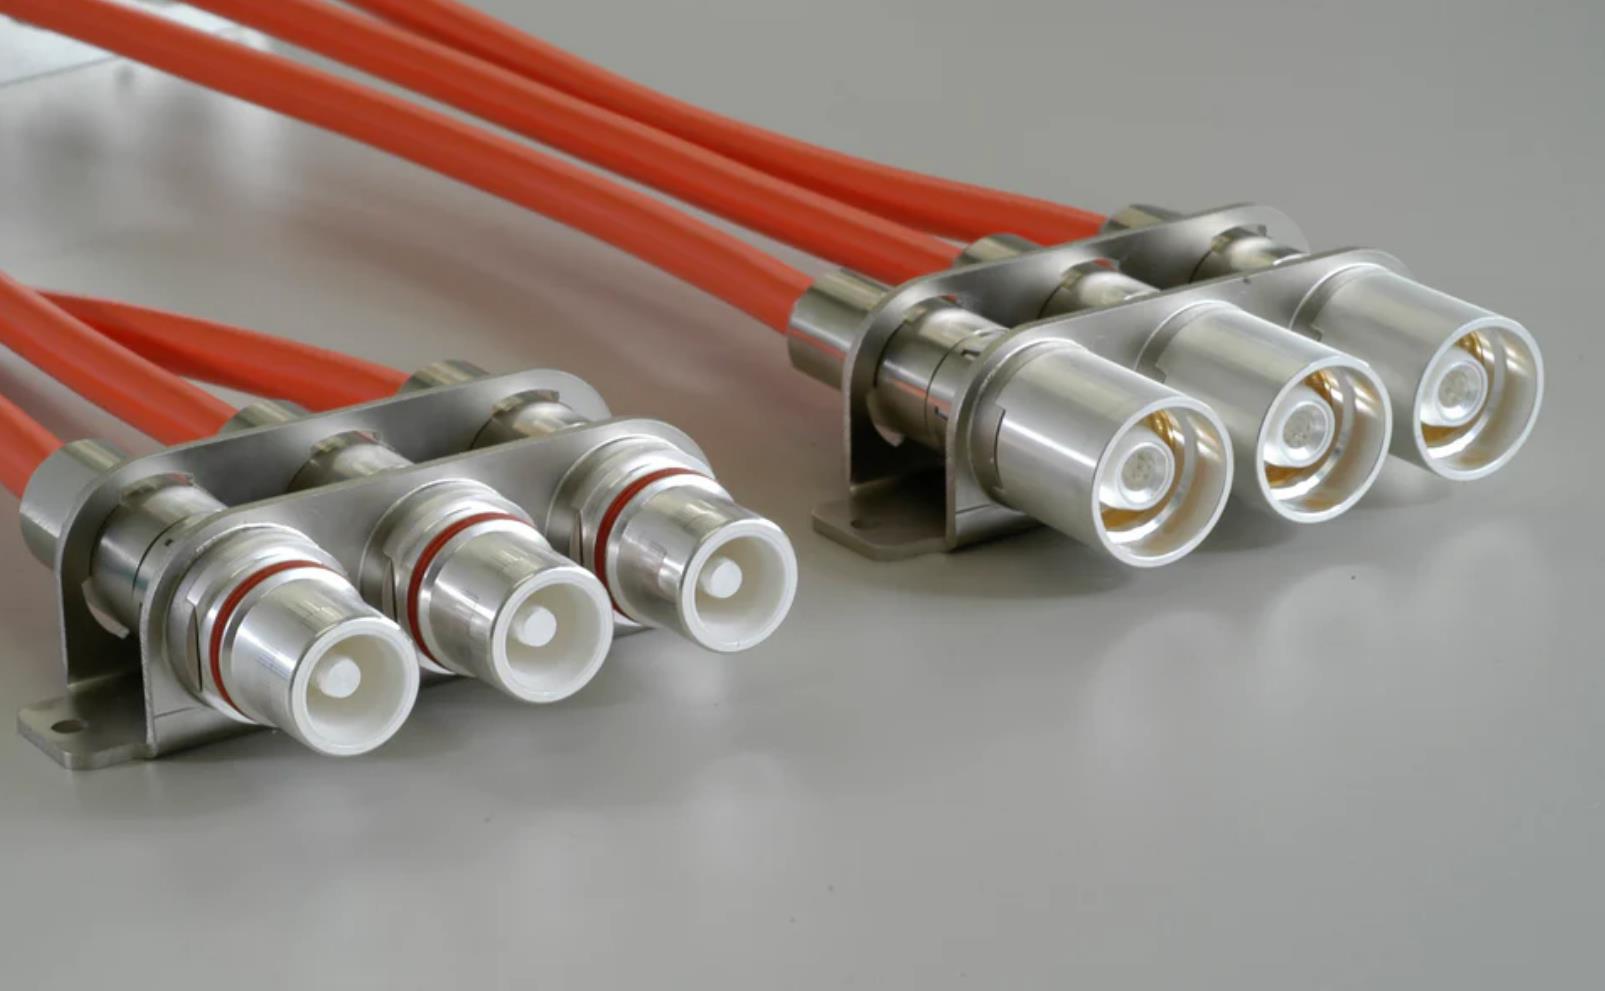 Industrial high current 600A triaxial metal connector cable assembly